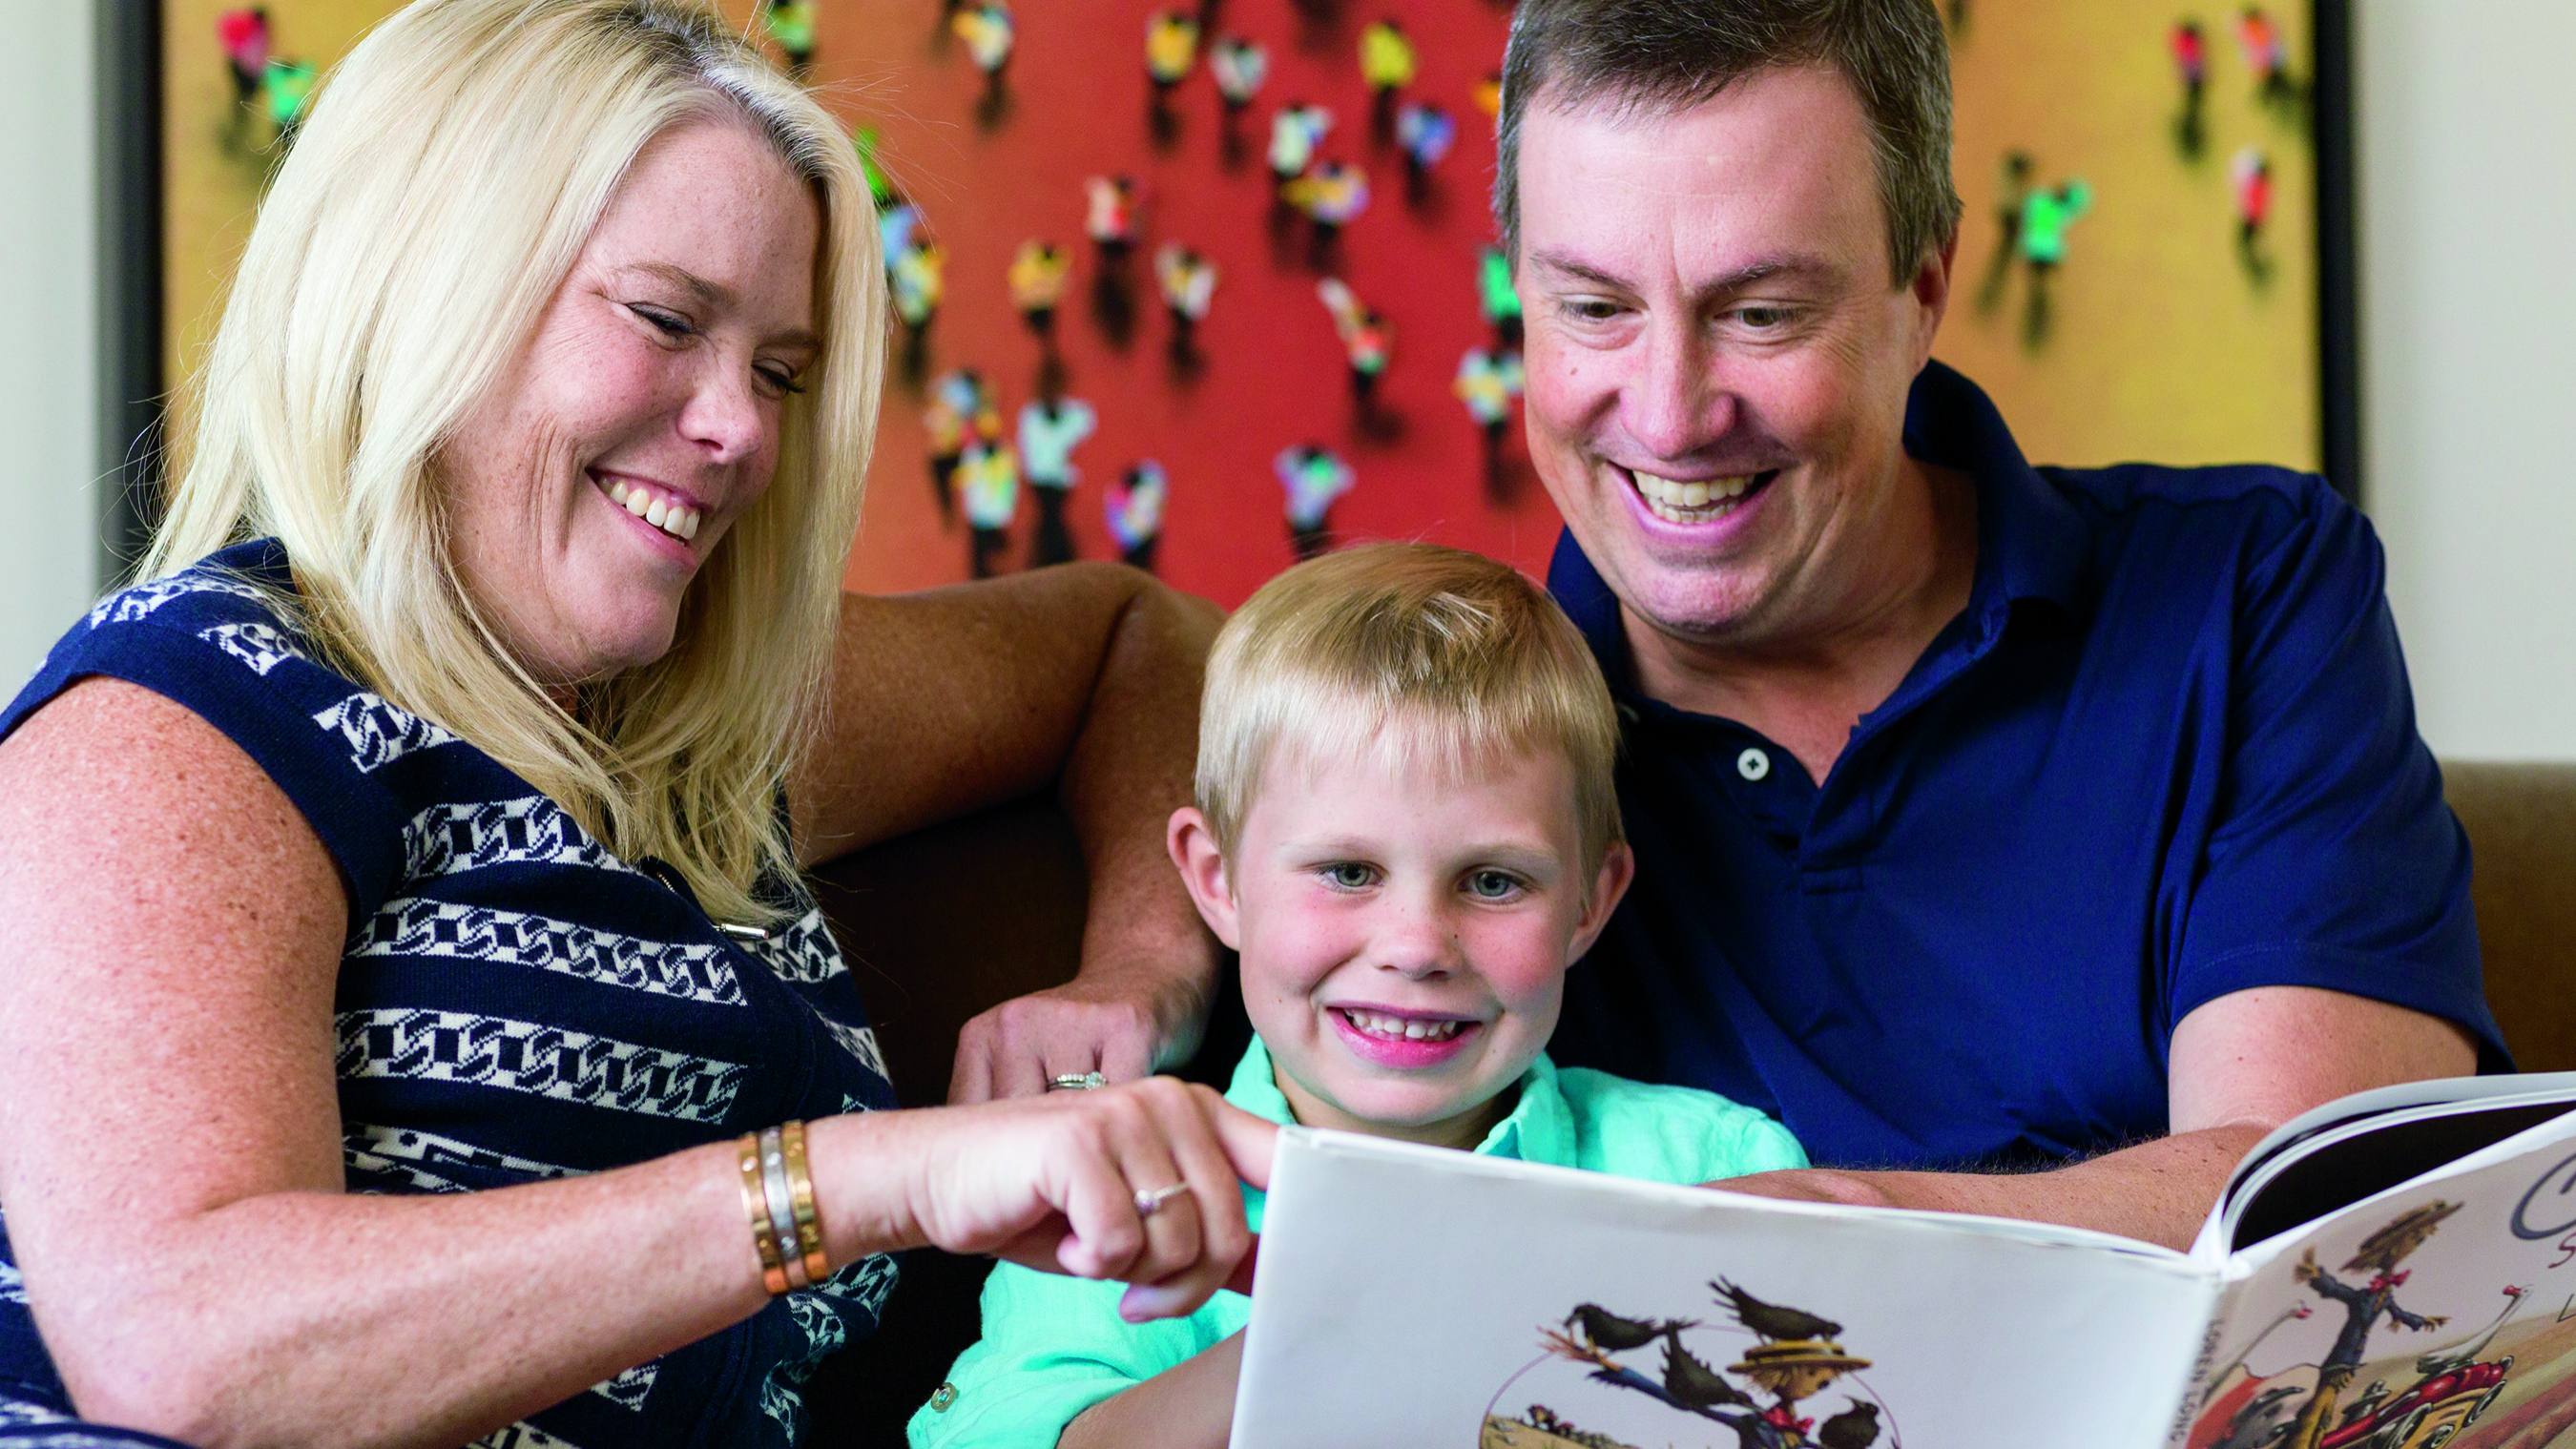 breast cancer patient Dawn Lenhardt smiling with her family and reading a children's book